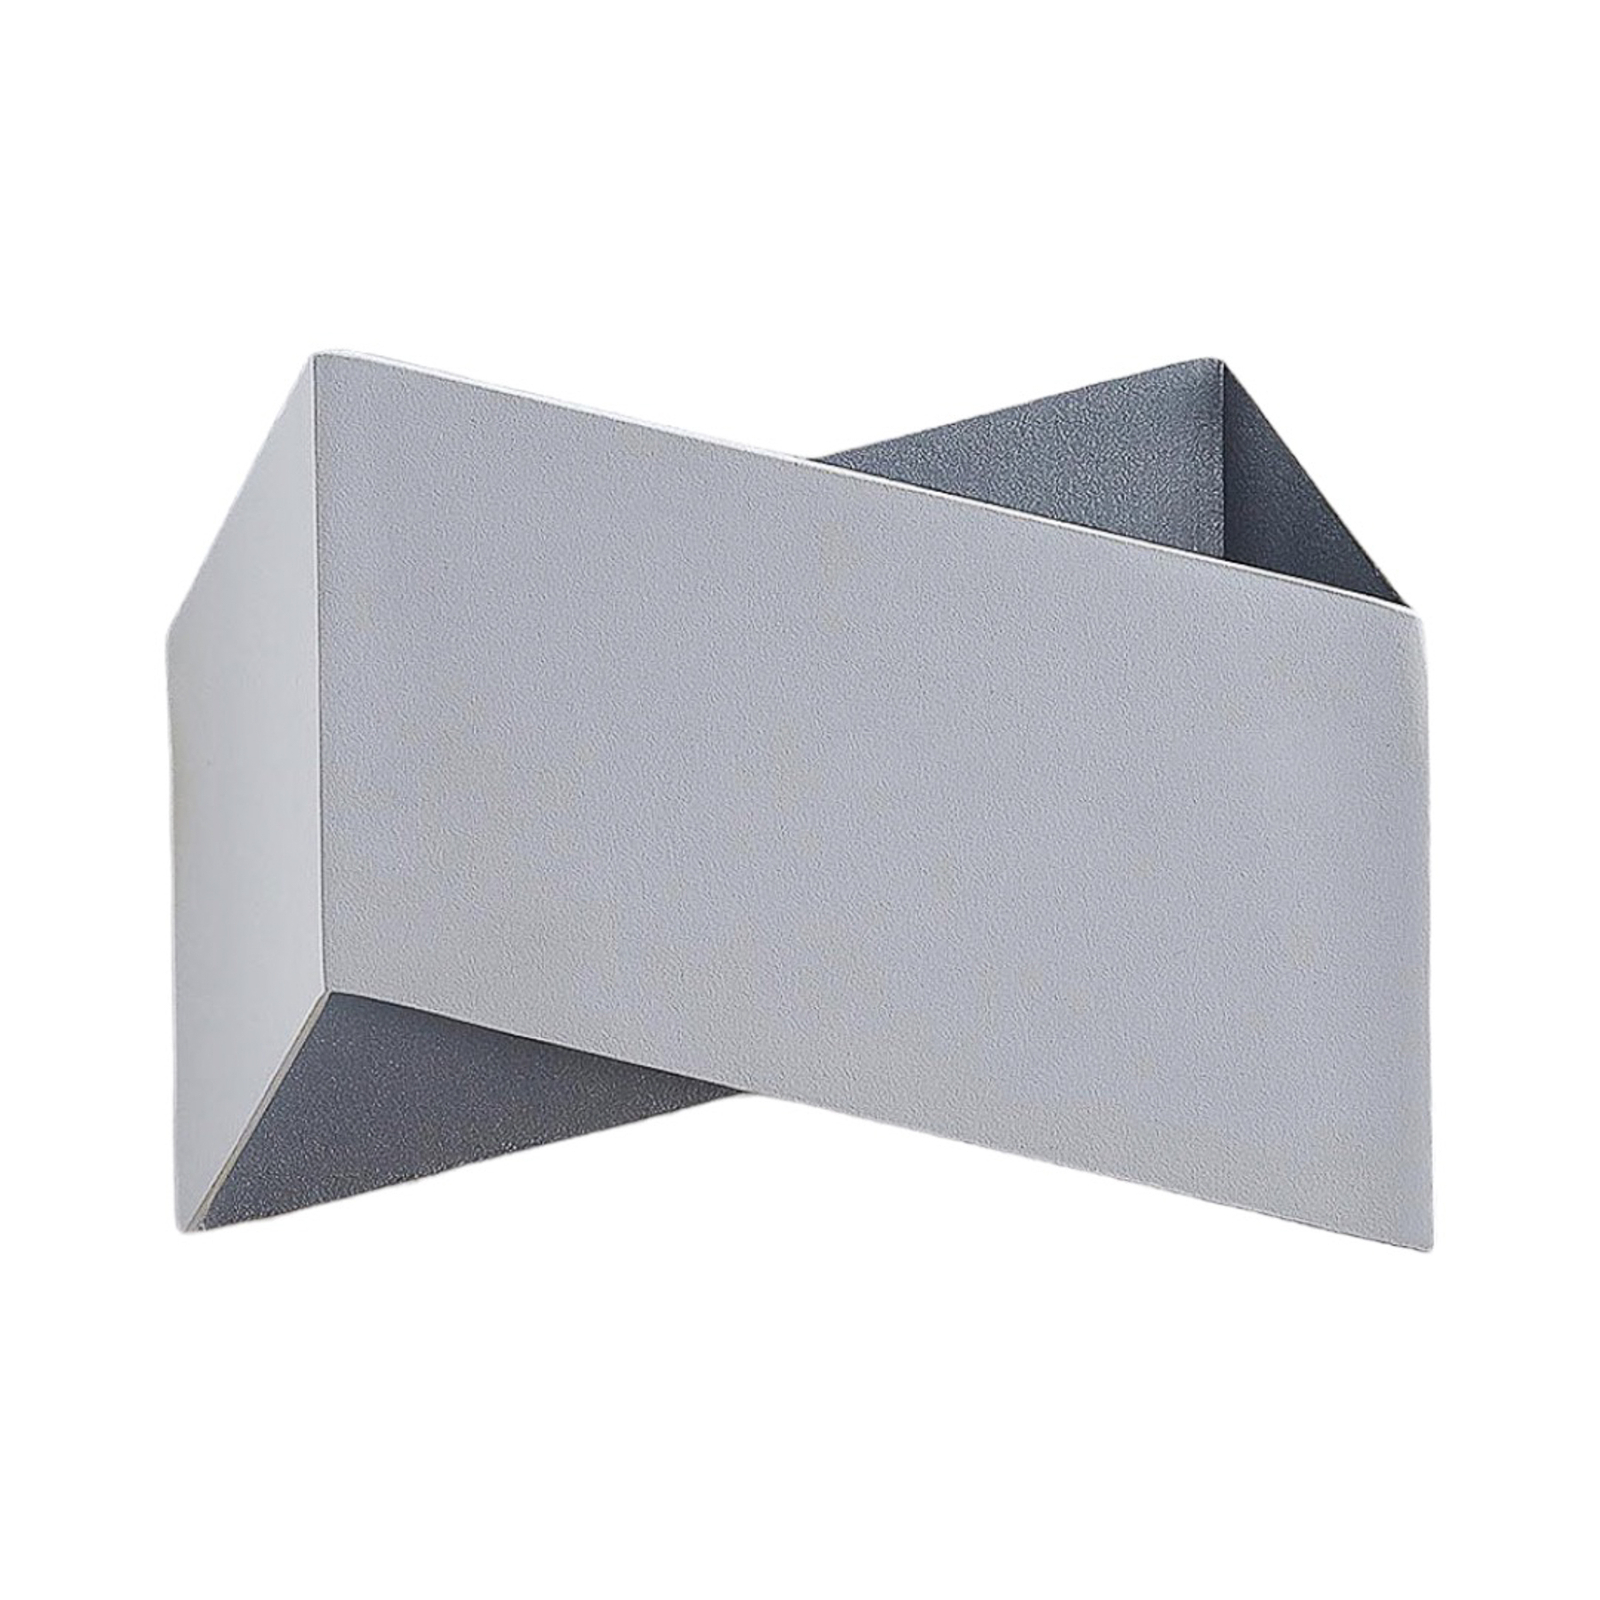 Arcchio Assona wall light, white and silver